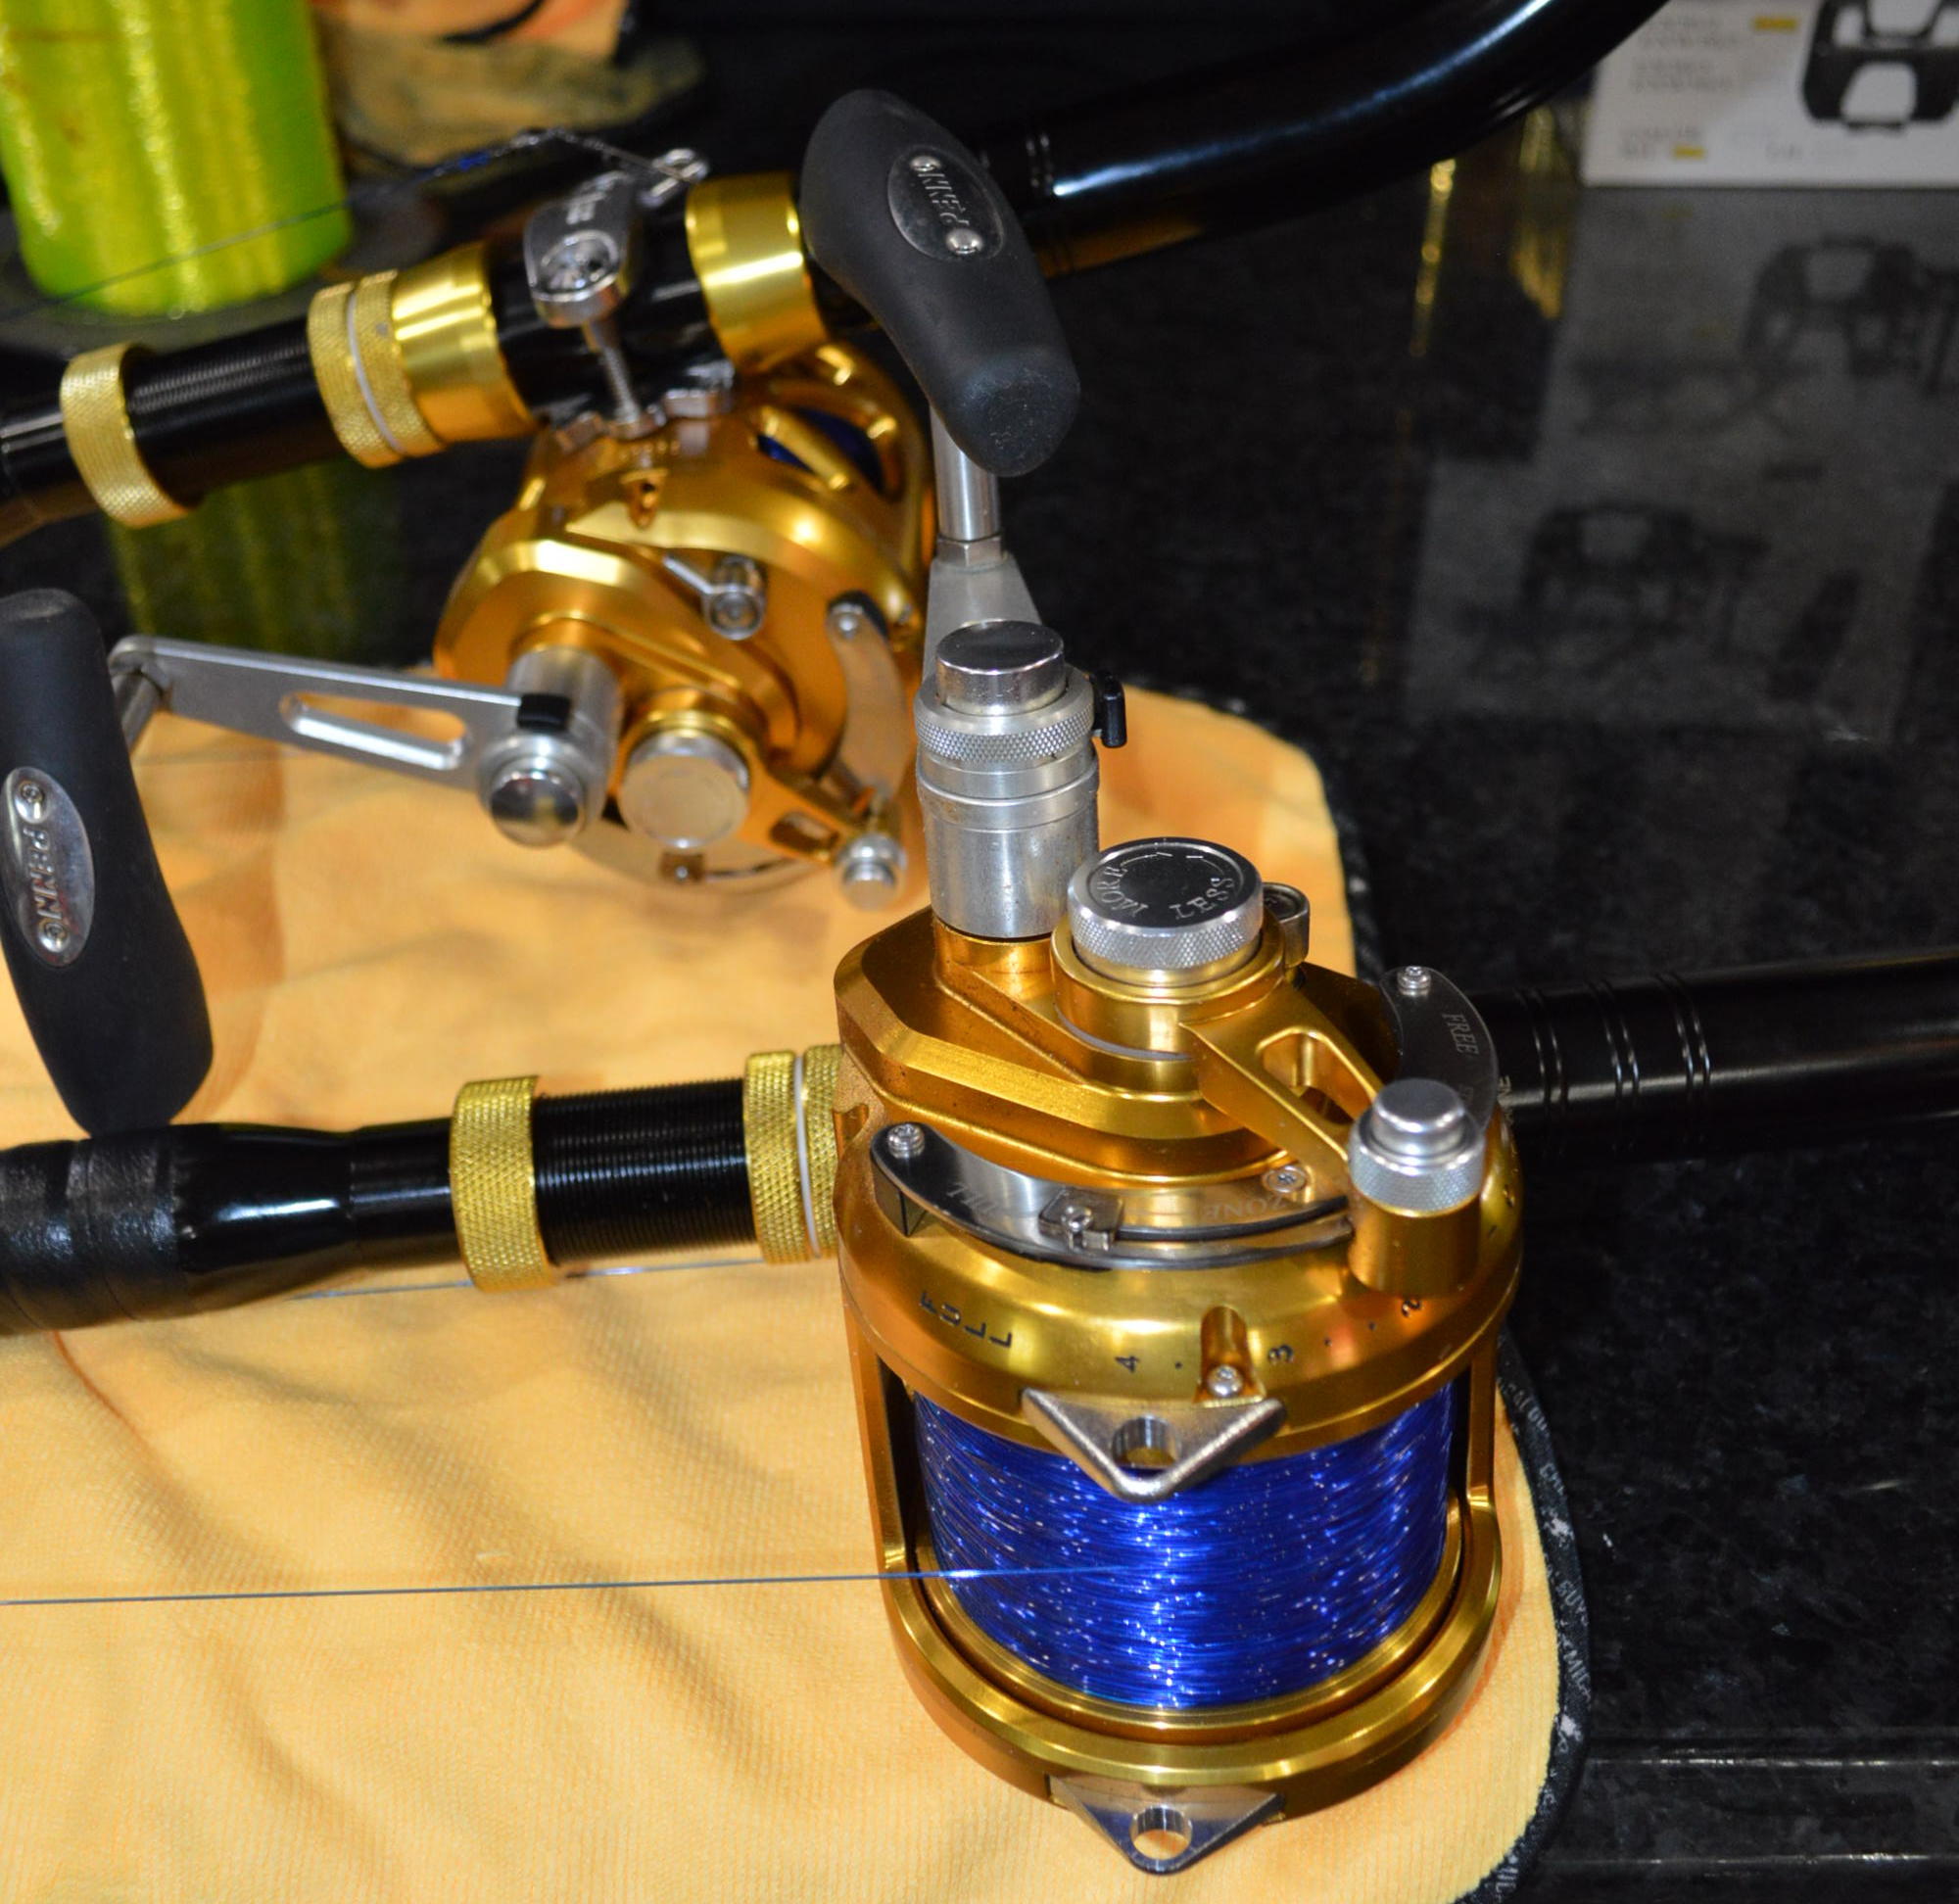 50 lb. or 80 lb. version of this trolling rod? - The Hull Truth - Boating  and Fishing Forum